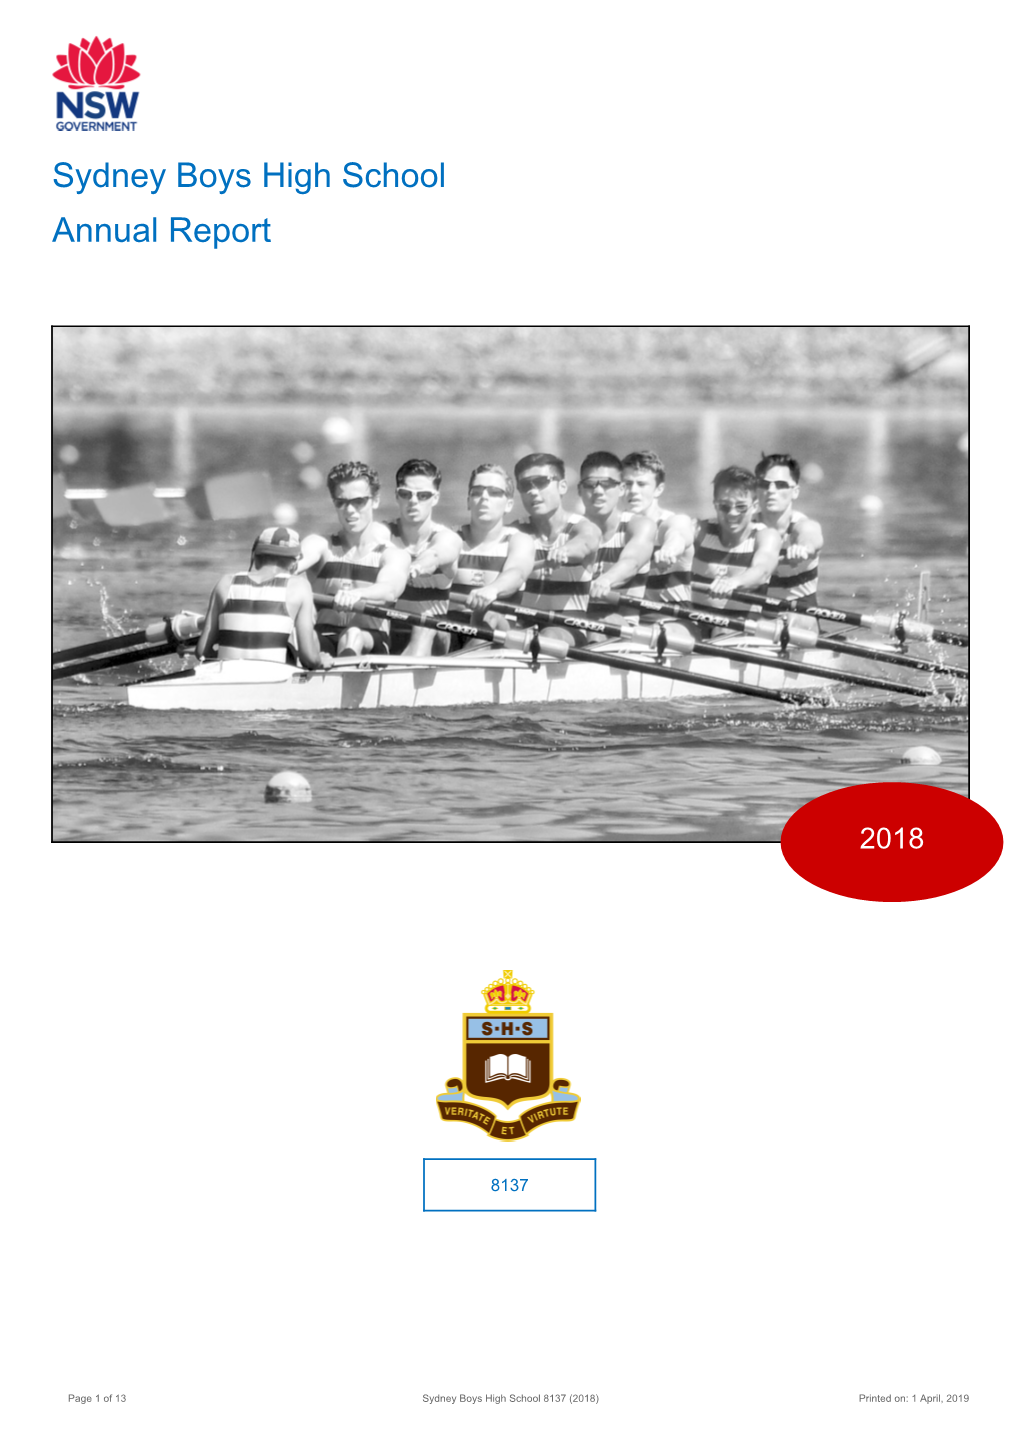 Annual Report for 2018 Is Provided to the Community of Sydney Boys High School As an Account of the School's Operations and Achievements Throughout the Year